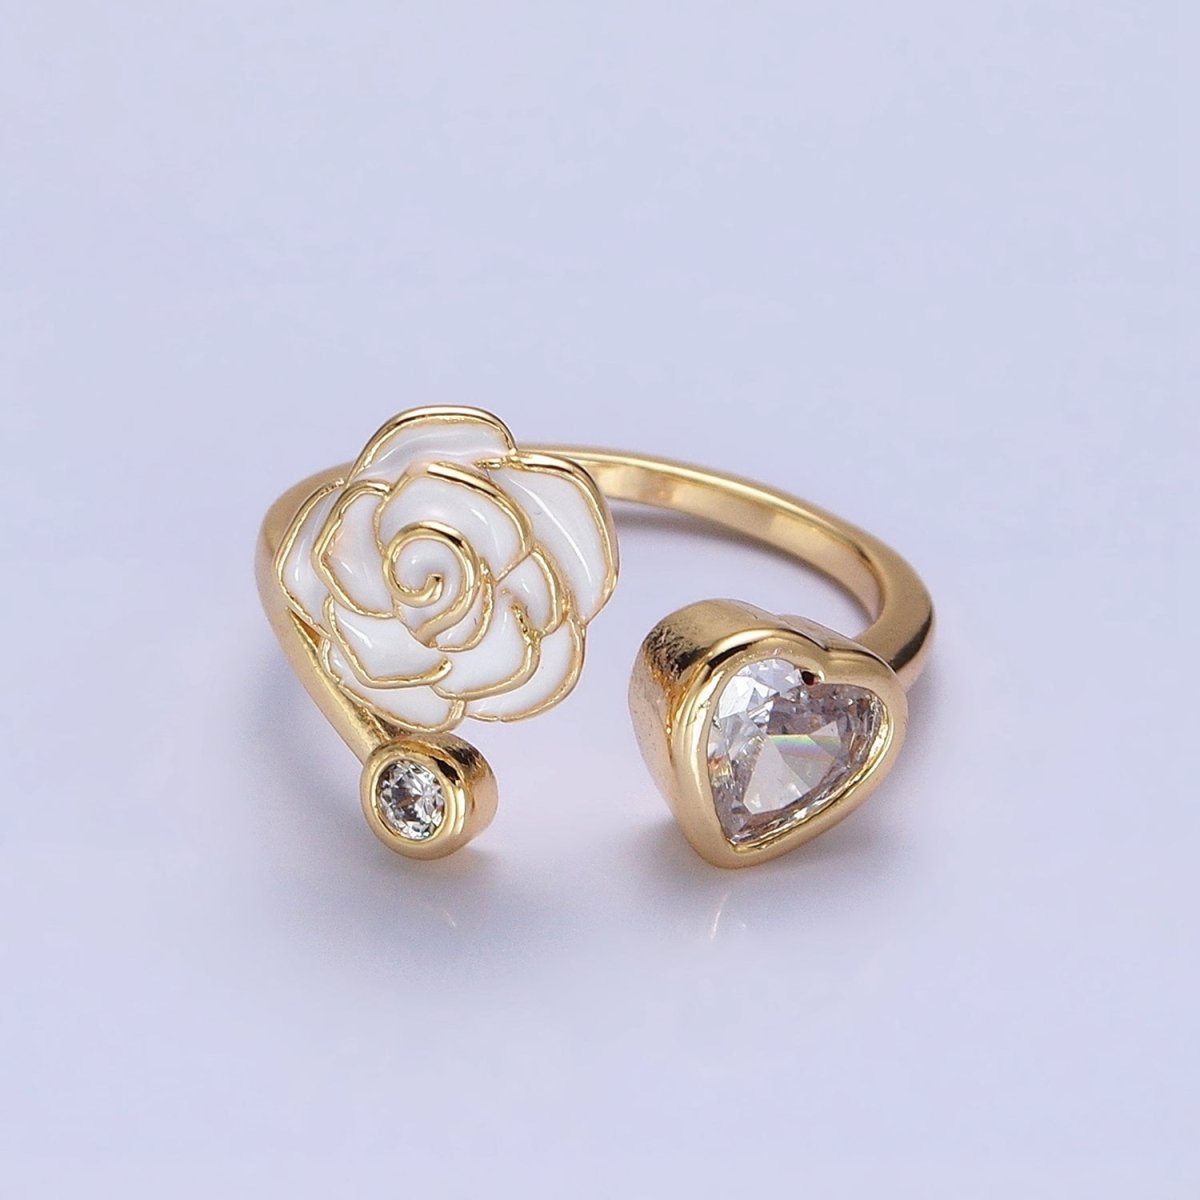 Silver, Gold Flower Rose White, Pink Enamel Clear CZ Open Ring | O-1884 O-1885 O-1886 O-1887 - DLUXCA